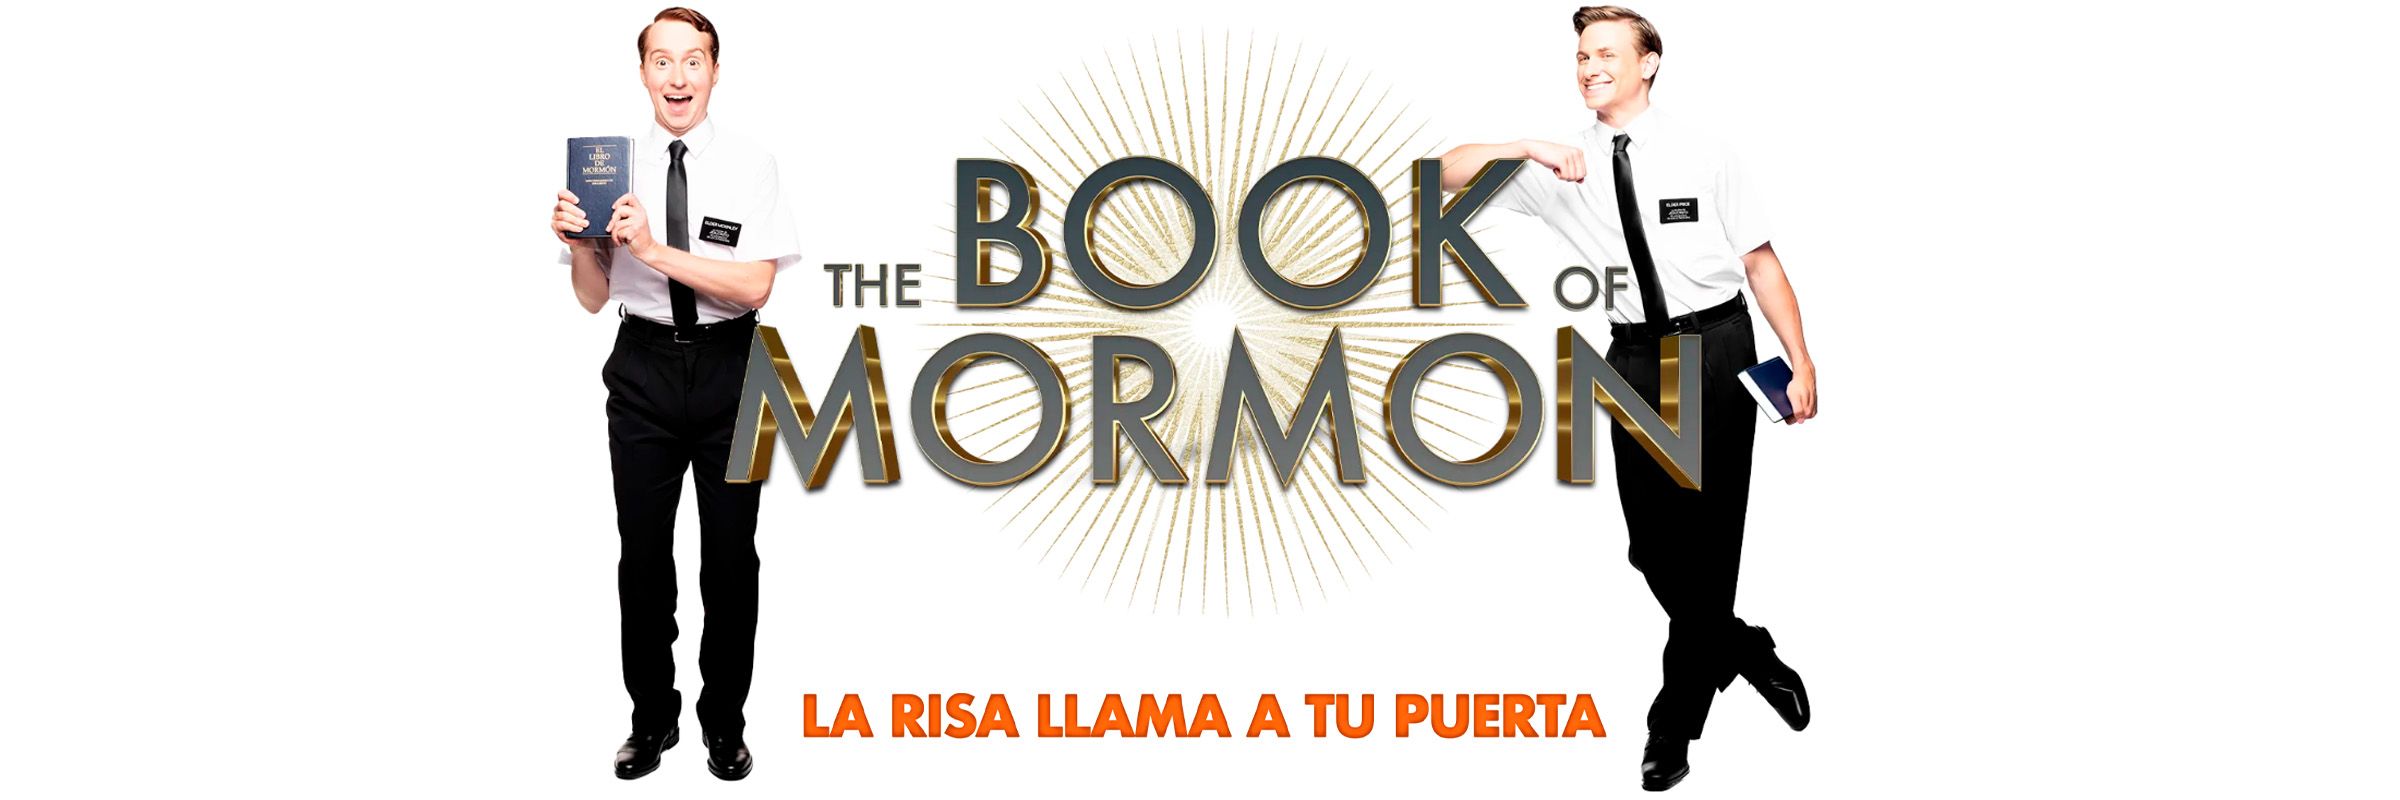 THE BOOK OF MORMON MAD